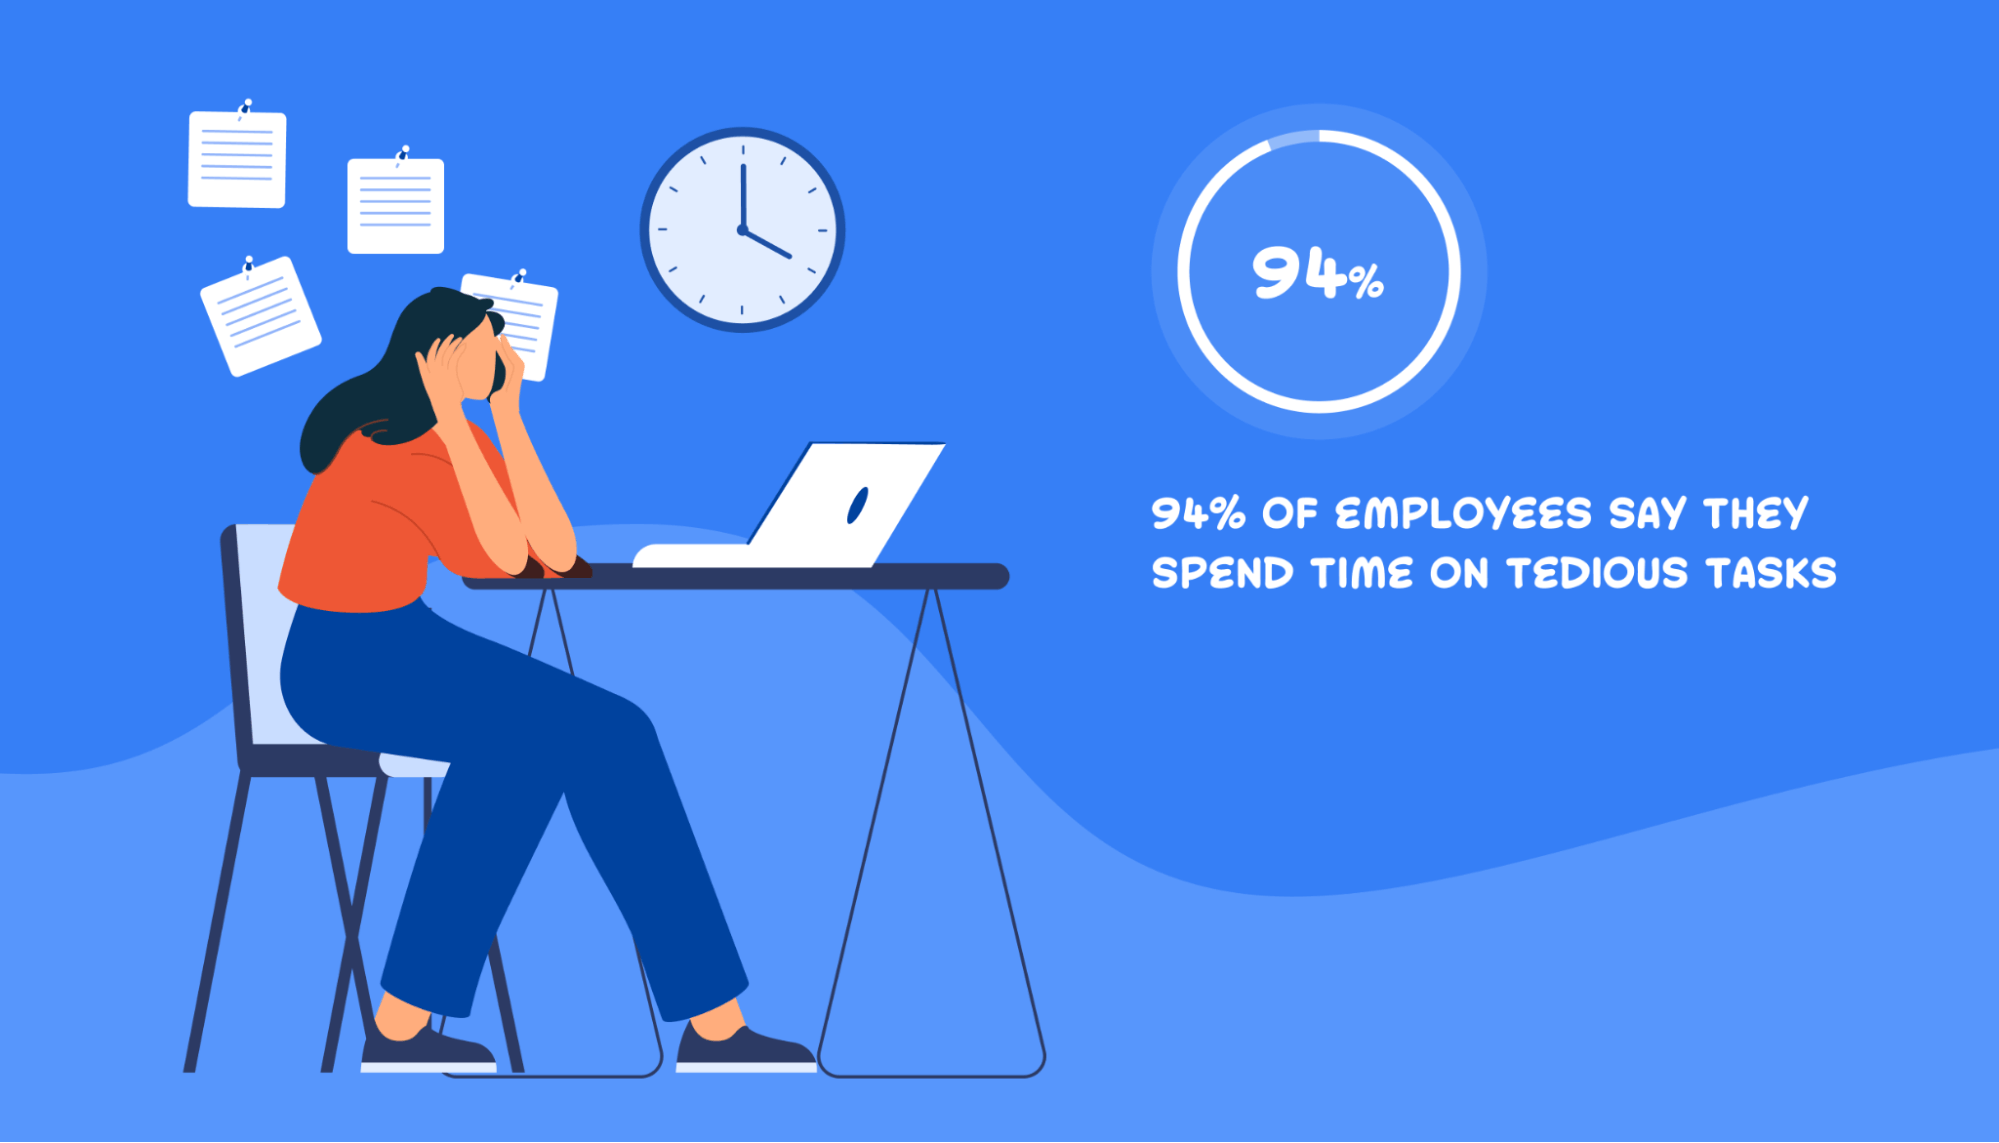 94% of employees say they spend time on tedious tasks